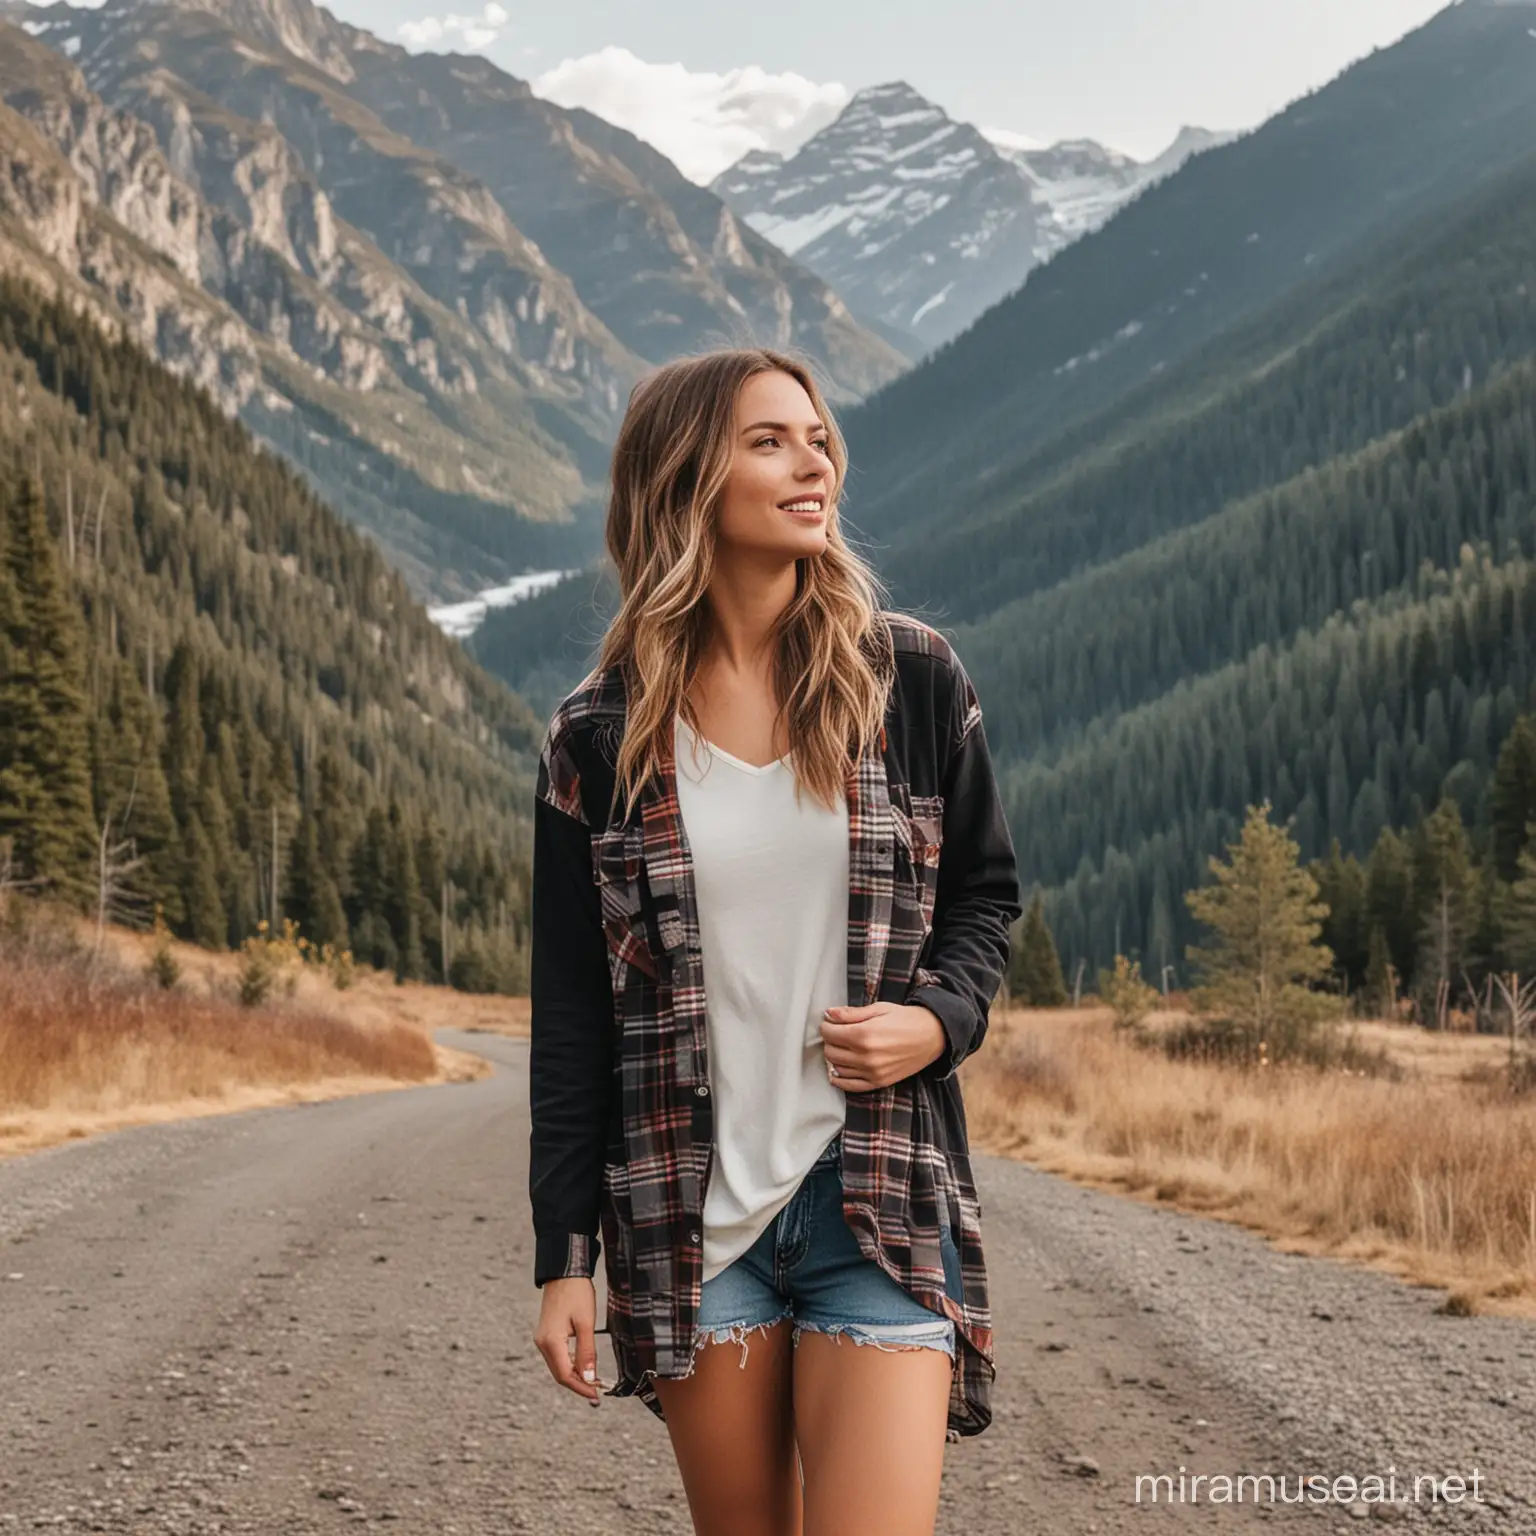 Fashionable Womens Mountain Vacation Outfits for Trendy Adventures